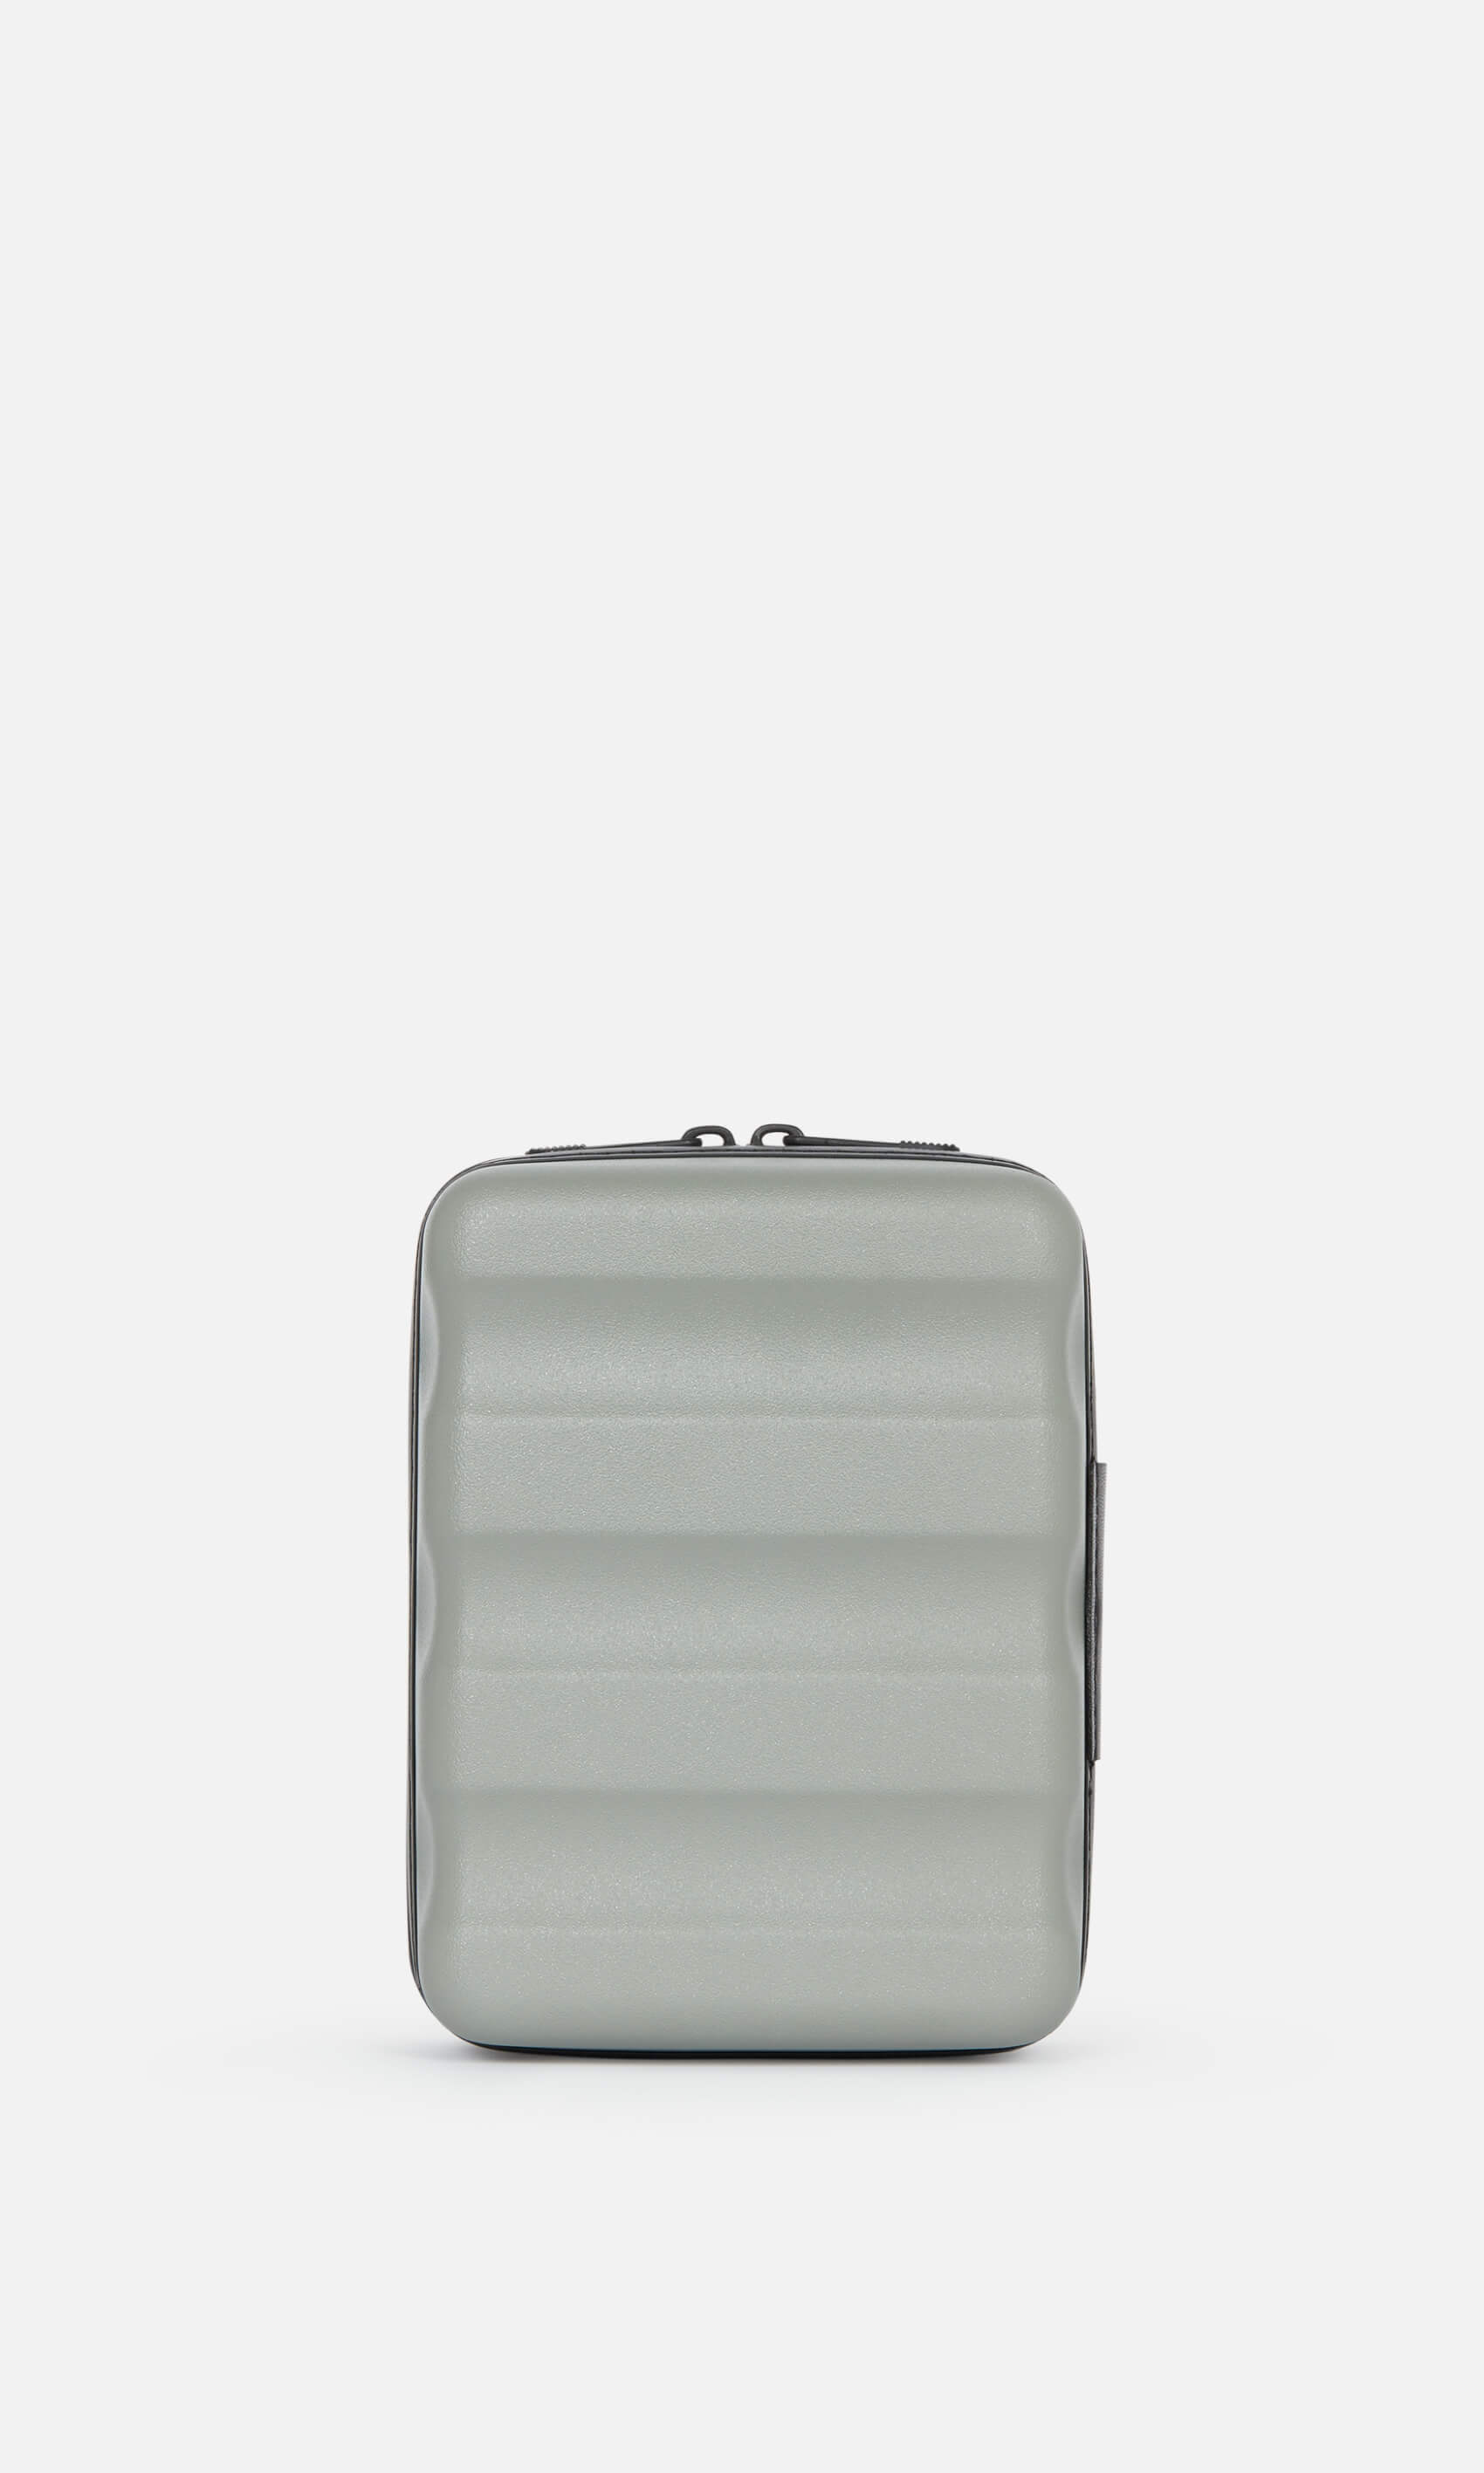 Antler Luggage -  Clifton mini in sage - Hard Suitcases Clifton Mini Case Sage (Green) | Travel Gifts & Accessories | Antler